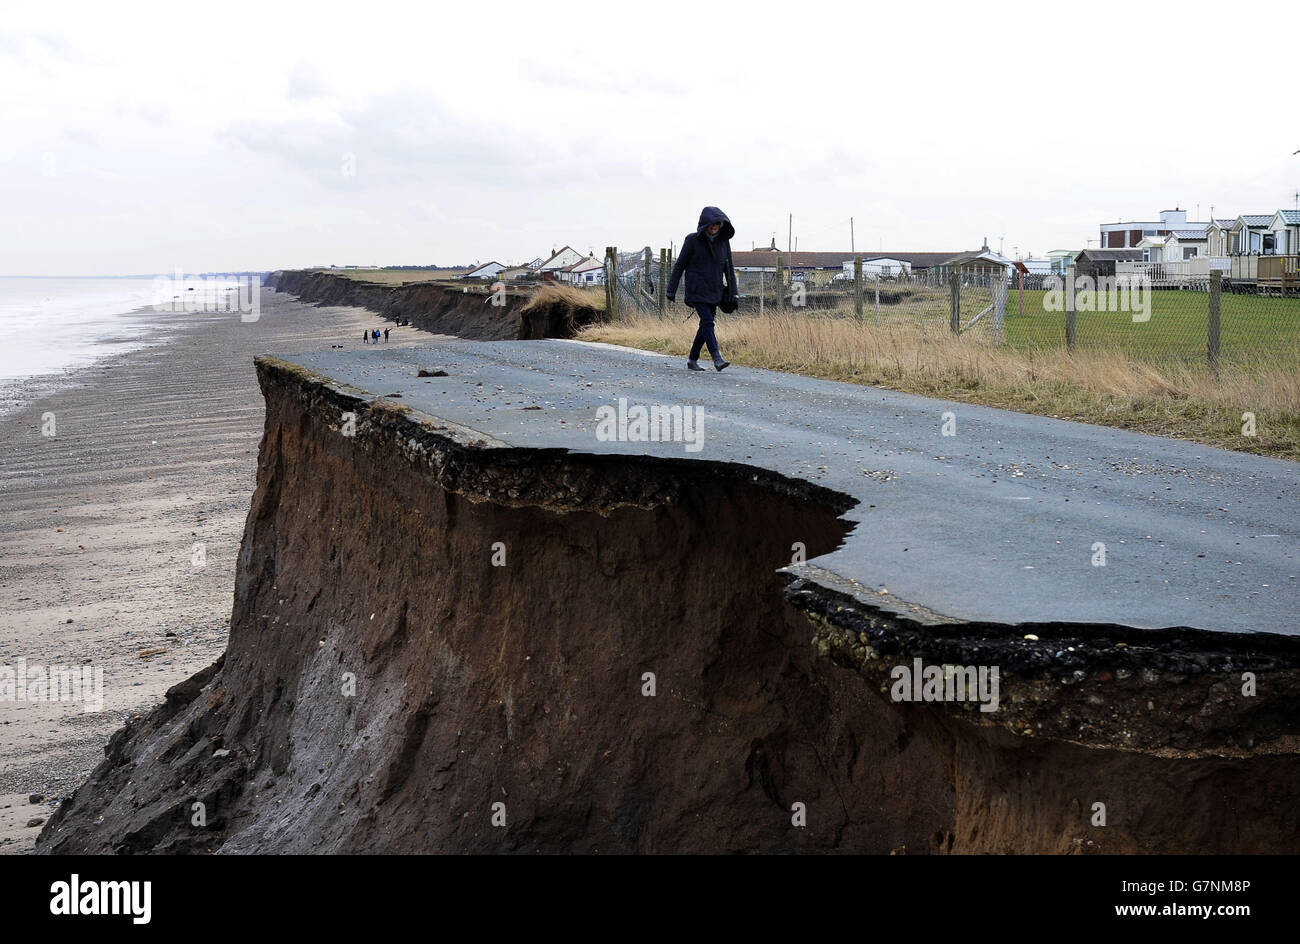 The coastal road south of Bridlington, between Ulrome and Skipsea, shows the rapid pace of erosion with only a small section of the original road left on the cliff tops. Stock Photo